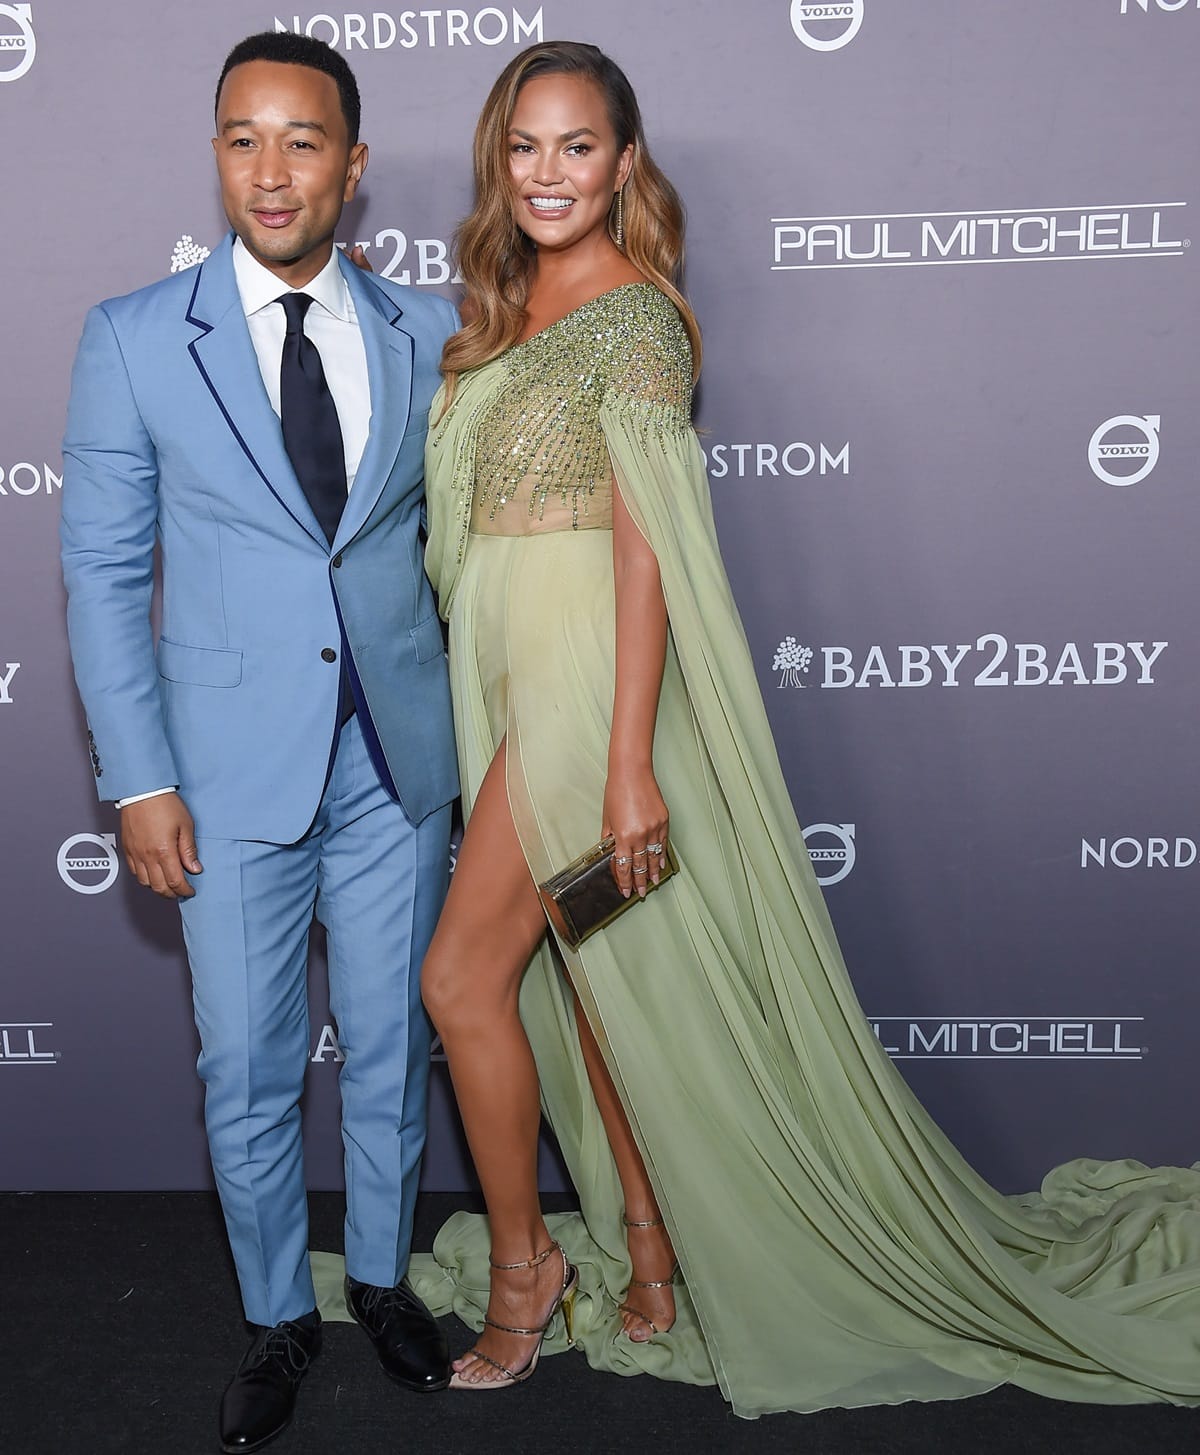 John Legend is reported to be around 5 feet 9 inches (175.3 cm) tall, making him slightly taller than Christine Teigen, with a difference of approximately 2 inches (5.1 cm)